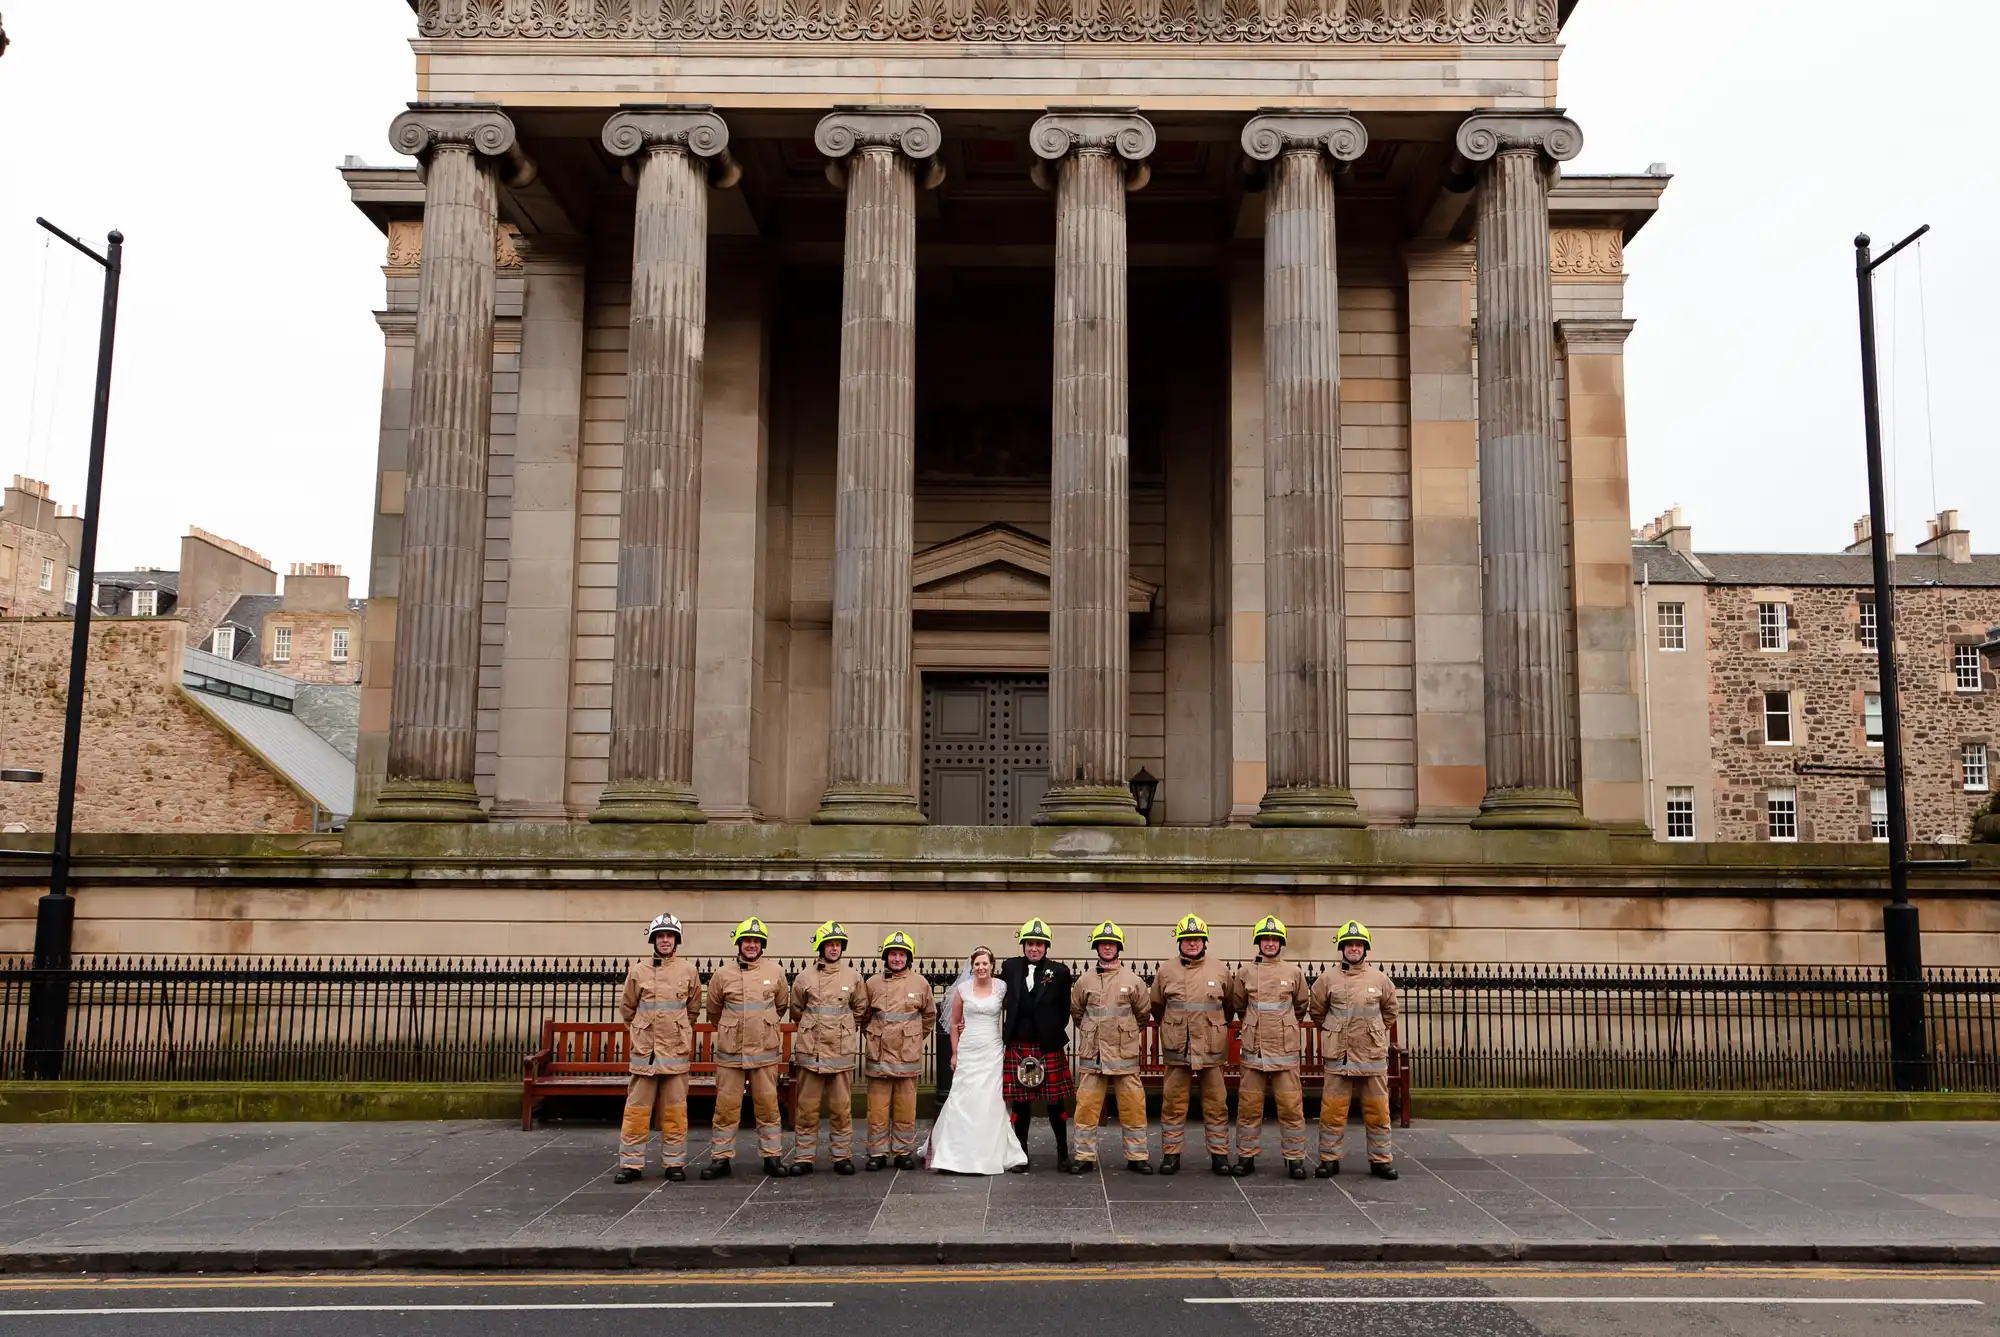 A bride and groom pose with a group of firefighters in front of the grand entrance of a classical stone building with columns.